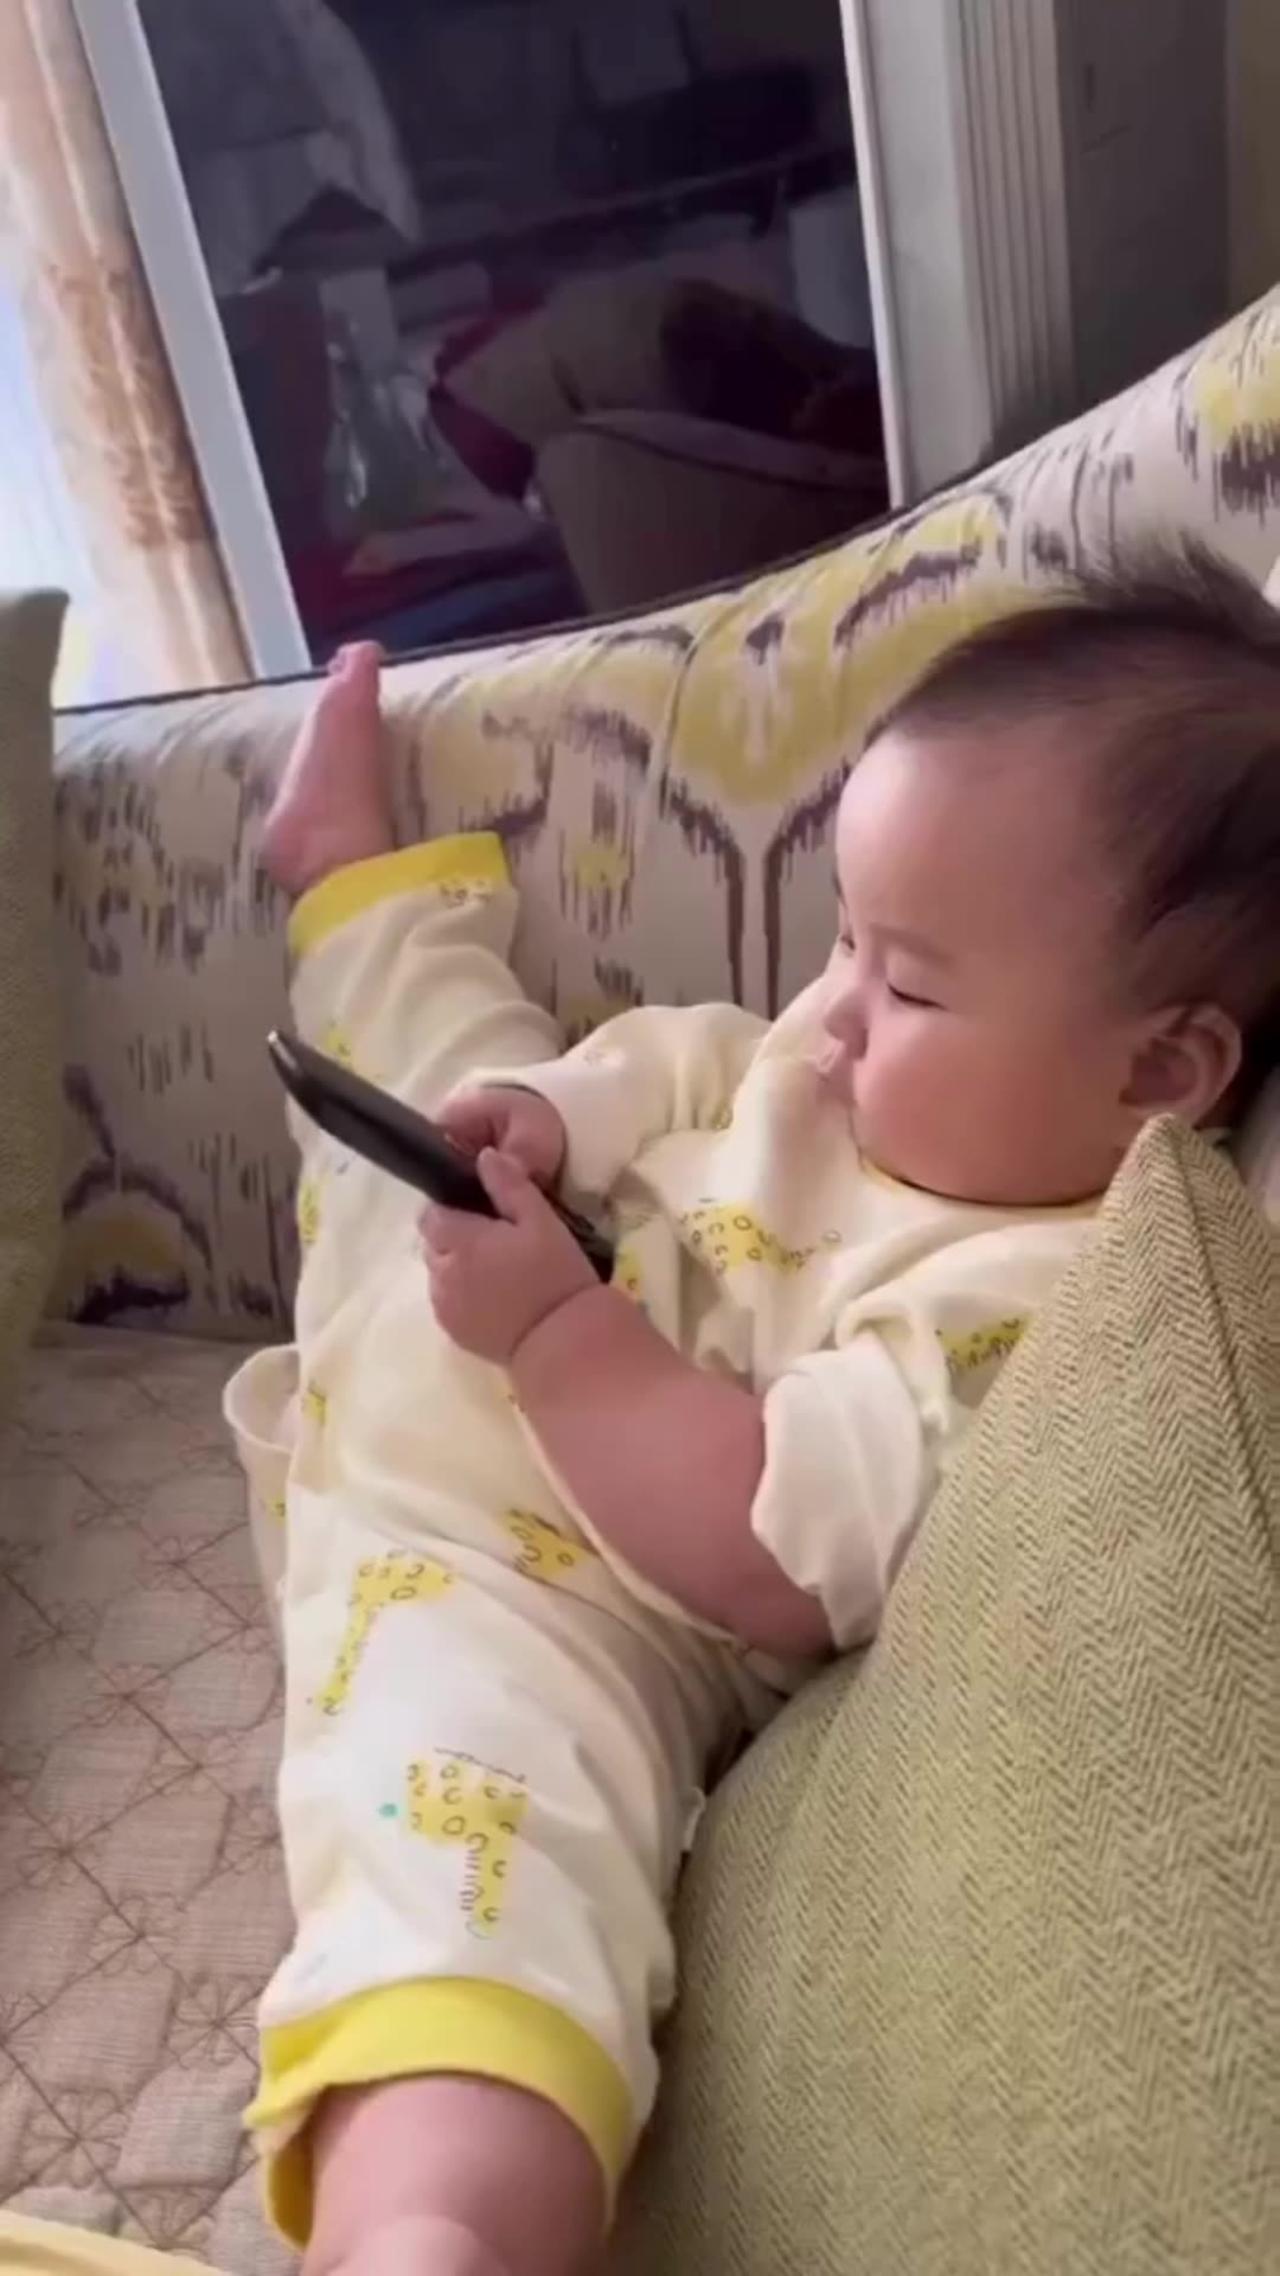 Cute and Funny Baby 😍😍😅😅 #kids #cutebaby #reels #shorts #viral #baby #babylove #funnybaby #mmvbaby